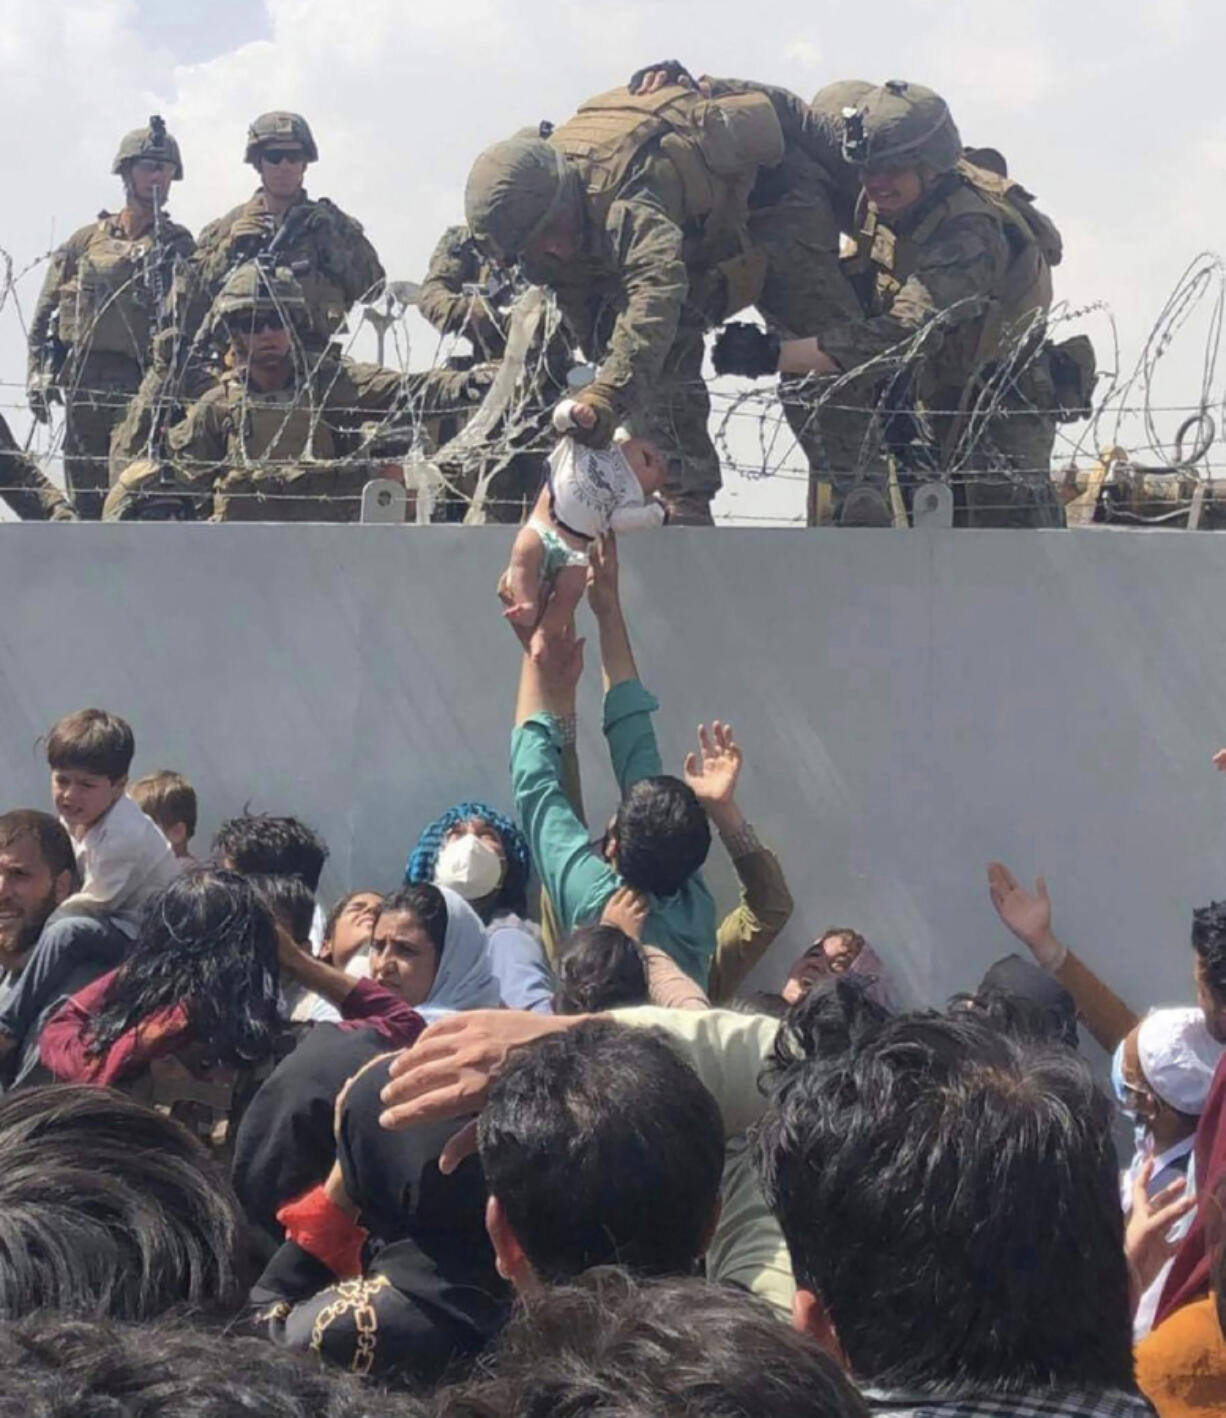 This image made available to AFP on Aug. 20, 2021 by Human Rights Activist Omar Haidari, shows a U.S. Marine grabbing an infant over a fence of barbed wire during an evacuation at Hamid Karzai International Airport in Kabul on Aug. 19, 2021.